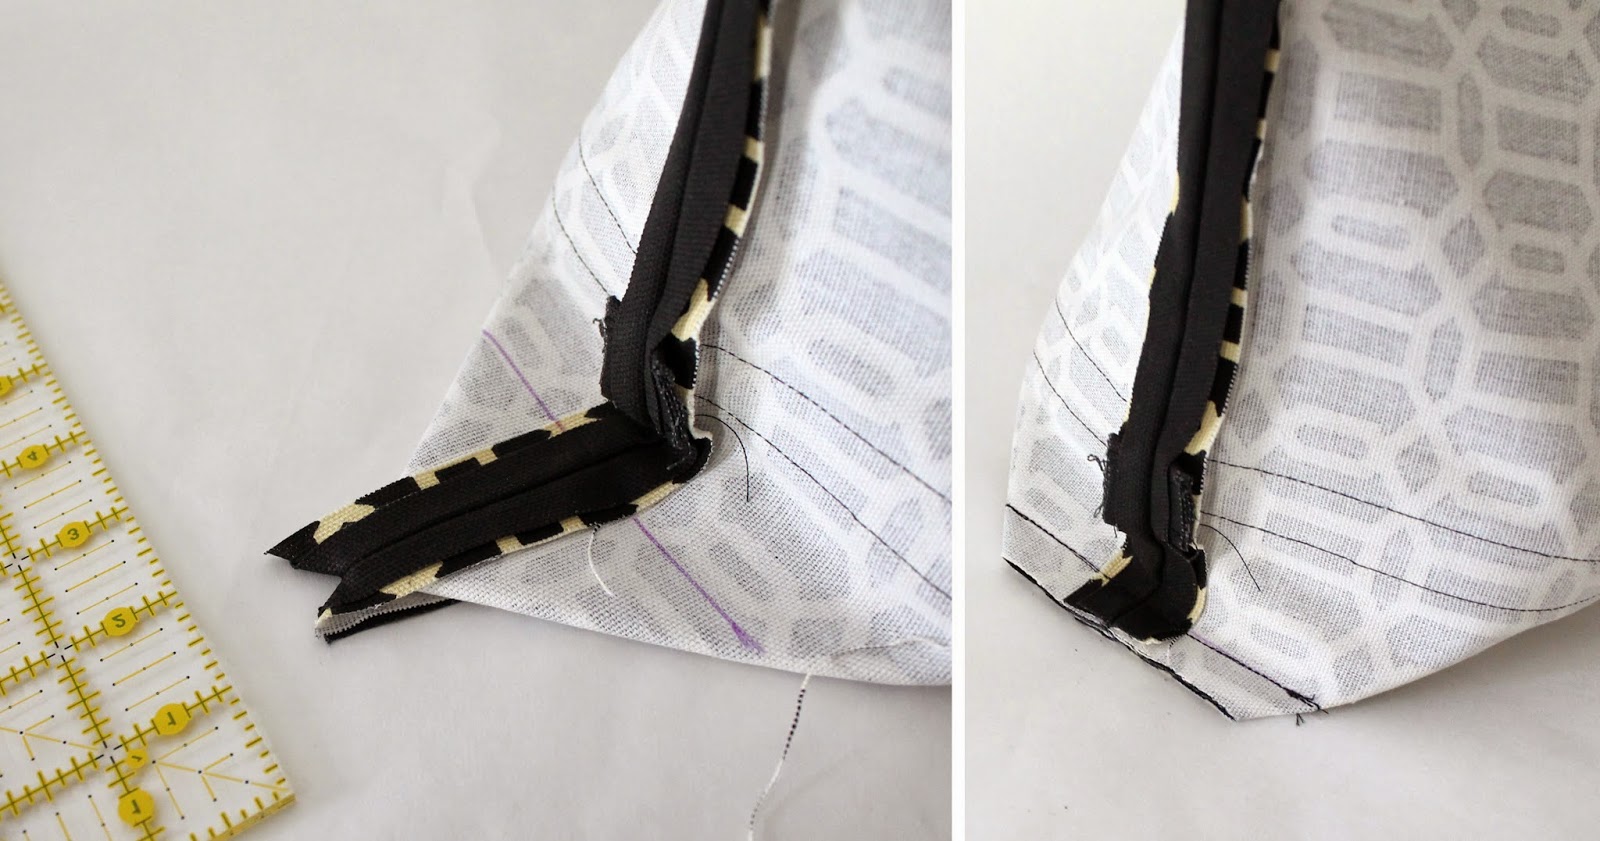 Tutorial: Lined Canvas Tote | Step by step directions how to sew a fully lined, canvas Tote Bag with an outer pocket and a reinforced bottom, including full cutting dimensions. | The Inspired Wren.